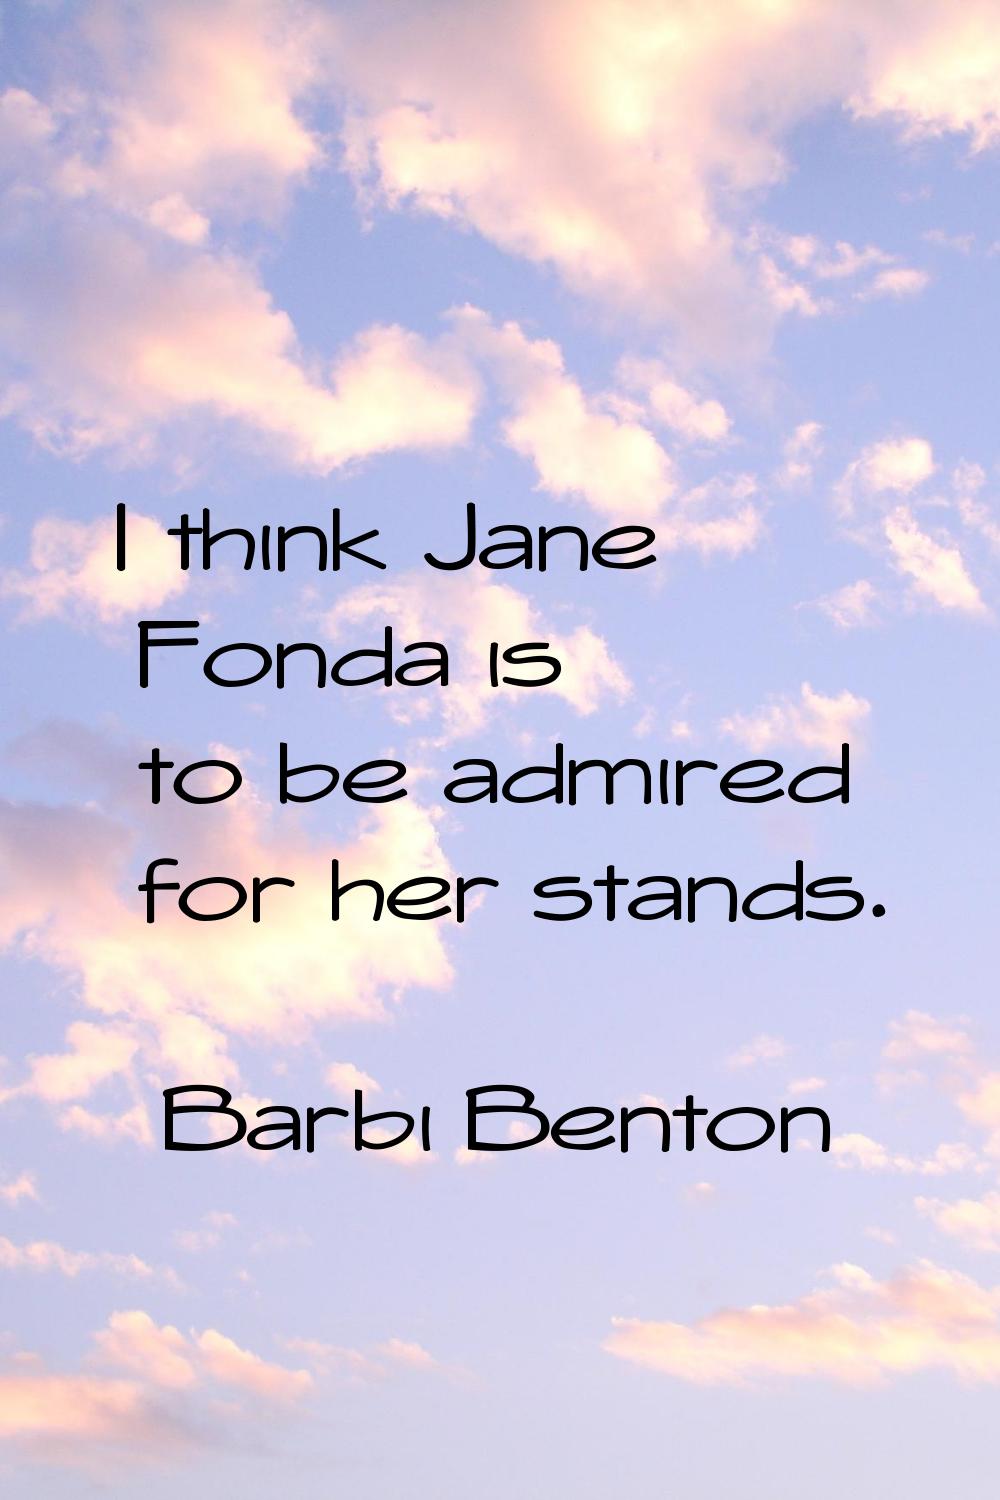 I think Jane Fonda is to be admired for her stands.